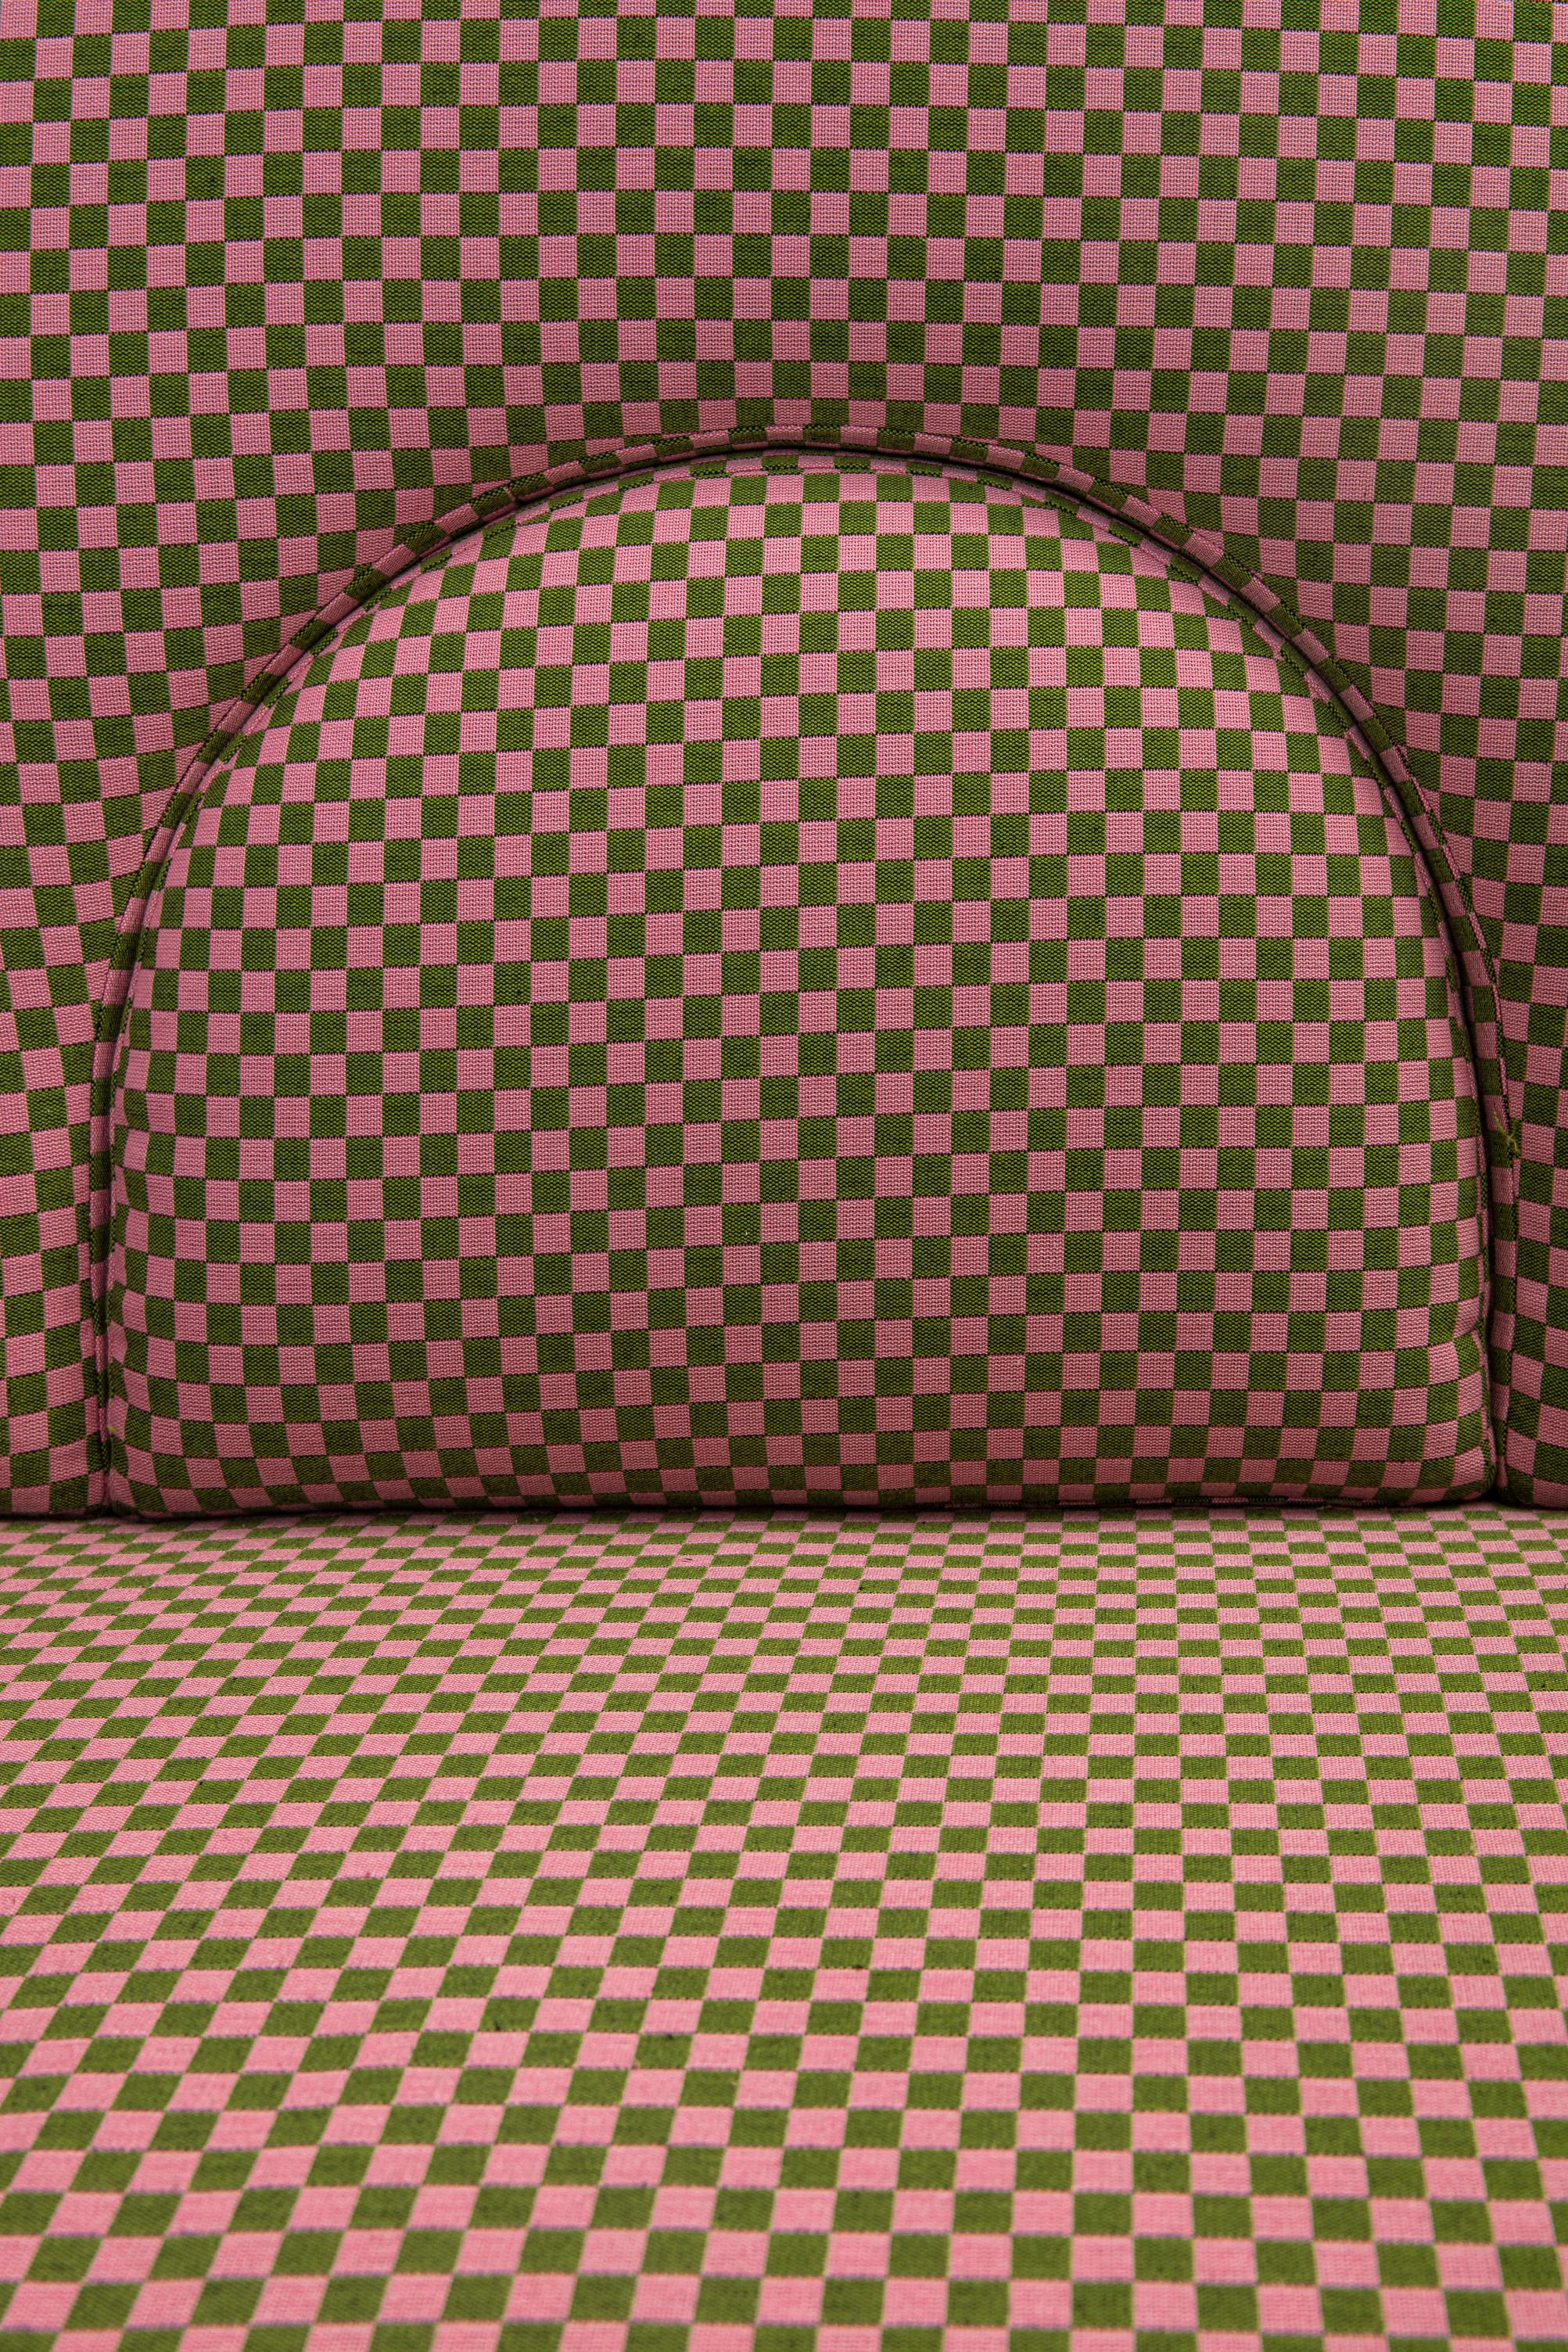 N-Gene Armchair with Green Checker Fabric and Purple Leather For Sale 3